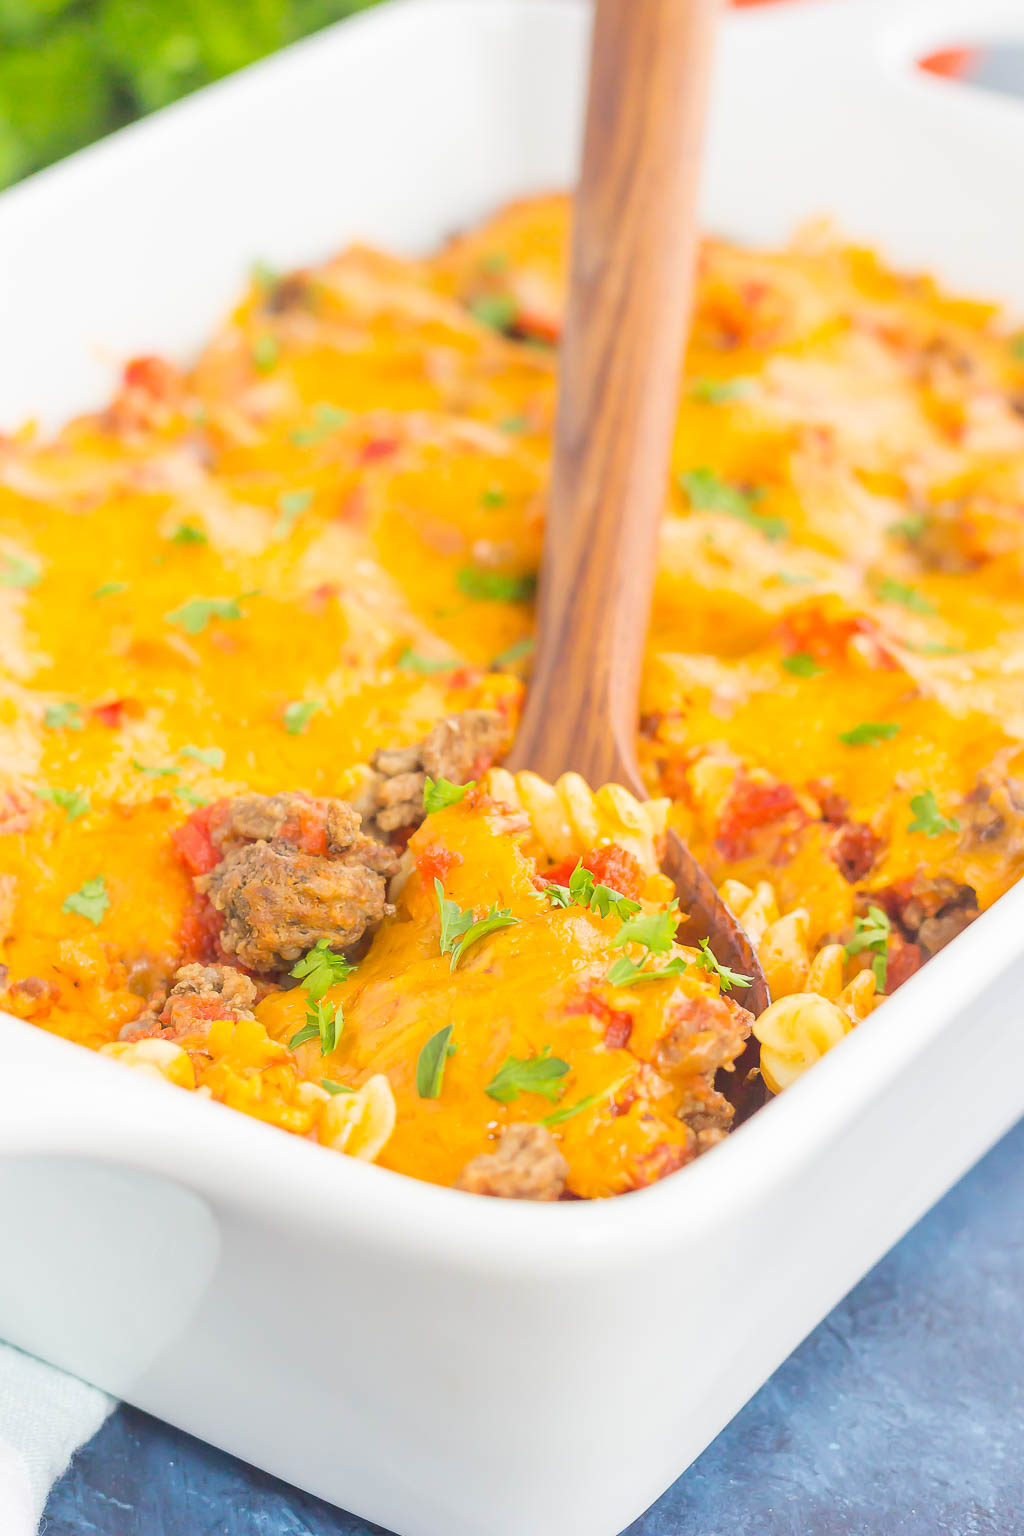 This Cheeseburger Casserole is loaded with the flavors of a classic cheeseburger, but in comfort food form. Tender pasta, seasoned ground beef, and a sprinkling of spices and cheese make this dish a family favorite for dinner!